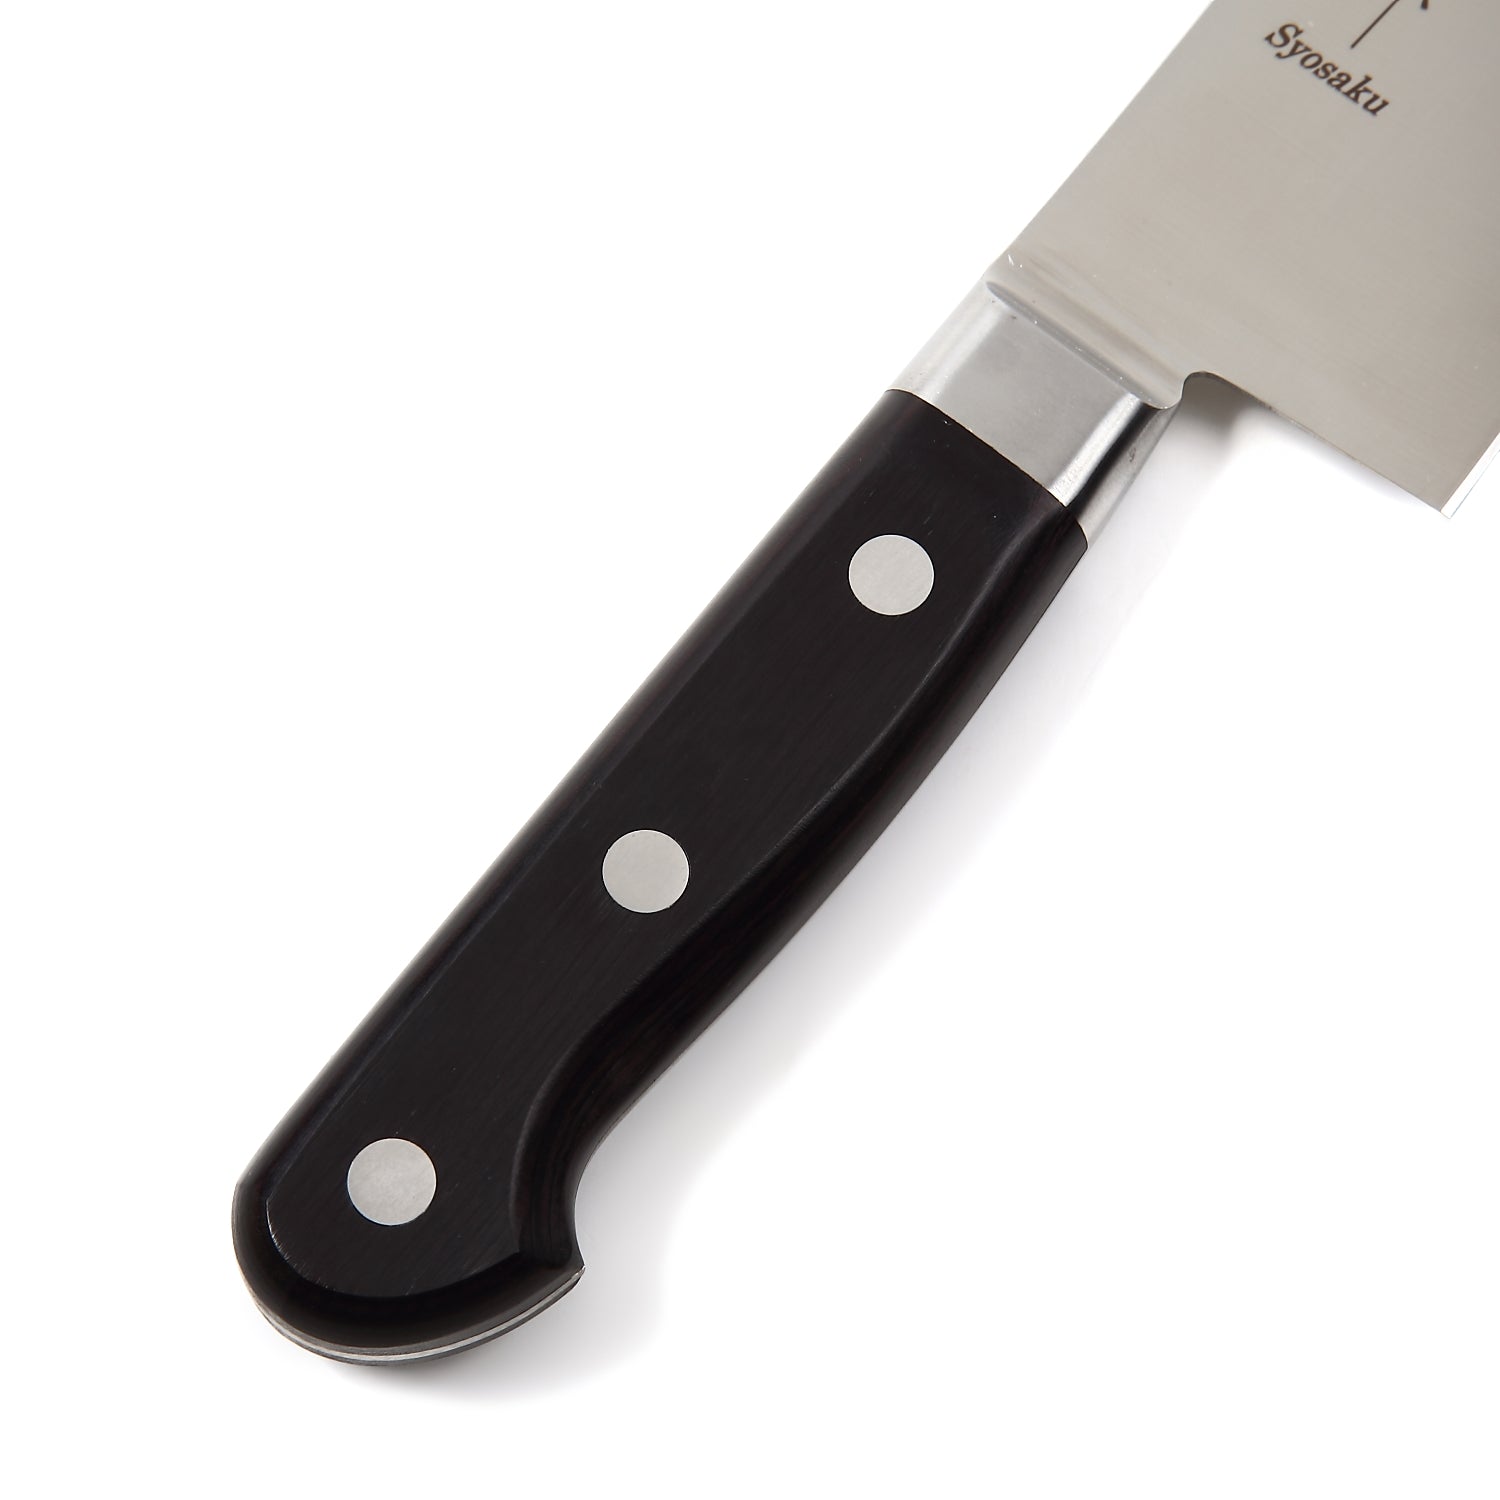  AOKEDA Chef Knife,8-Inch Stainless knife,Super Sharp